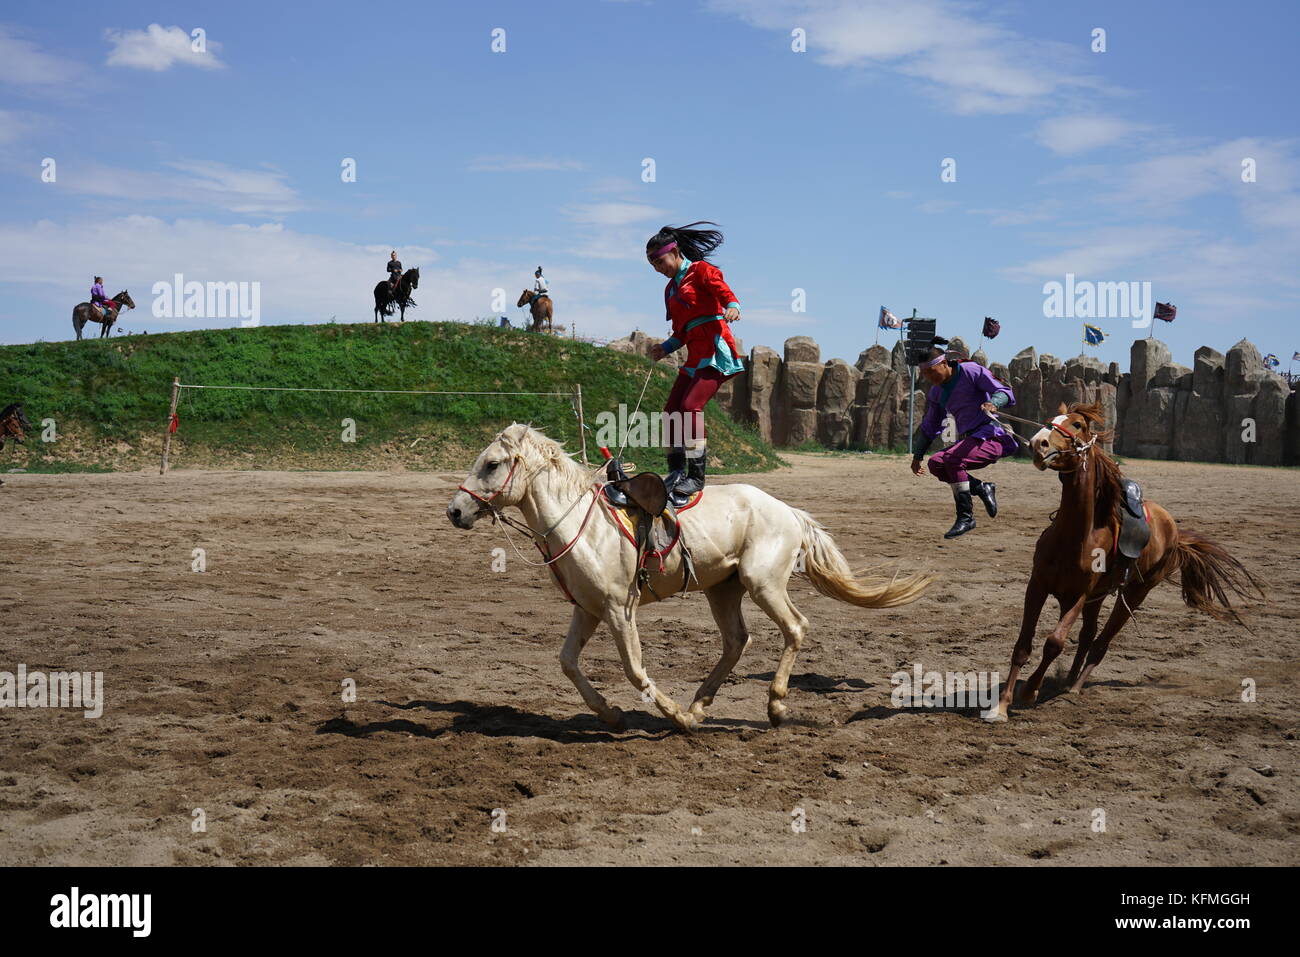 A female Mongolian rider stands on the back of a galloping horse. Her partner, another male rider, took the reins and jumped off the horse. Stock Photo